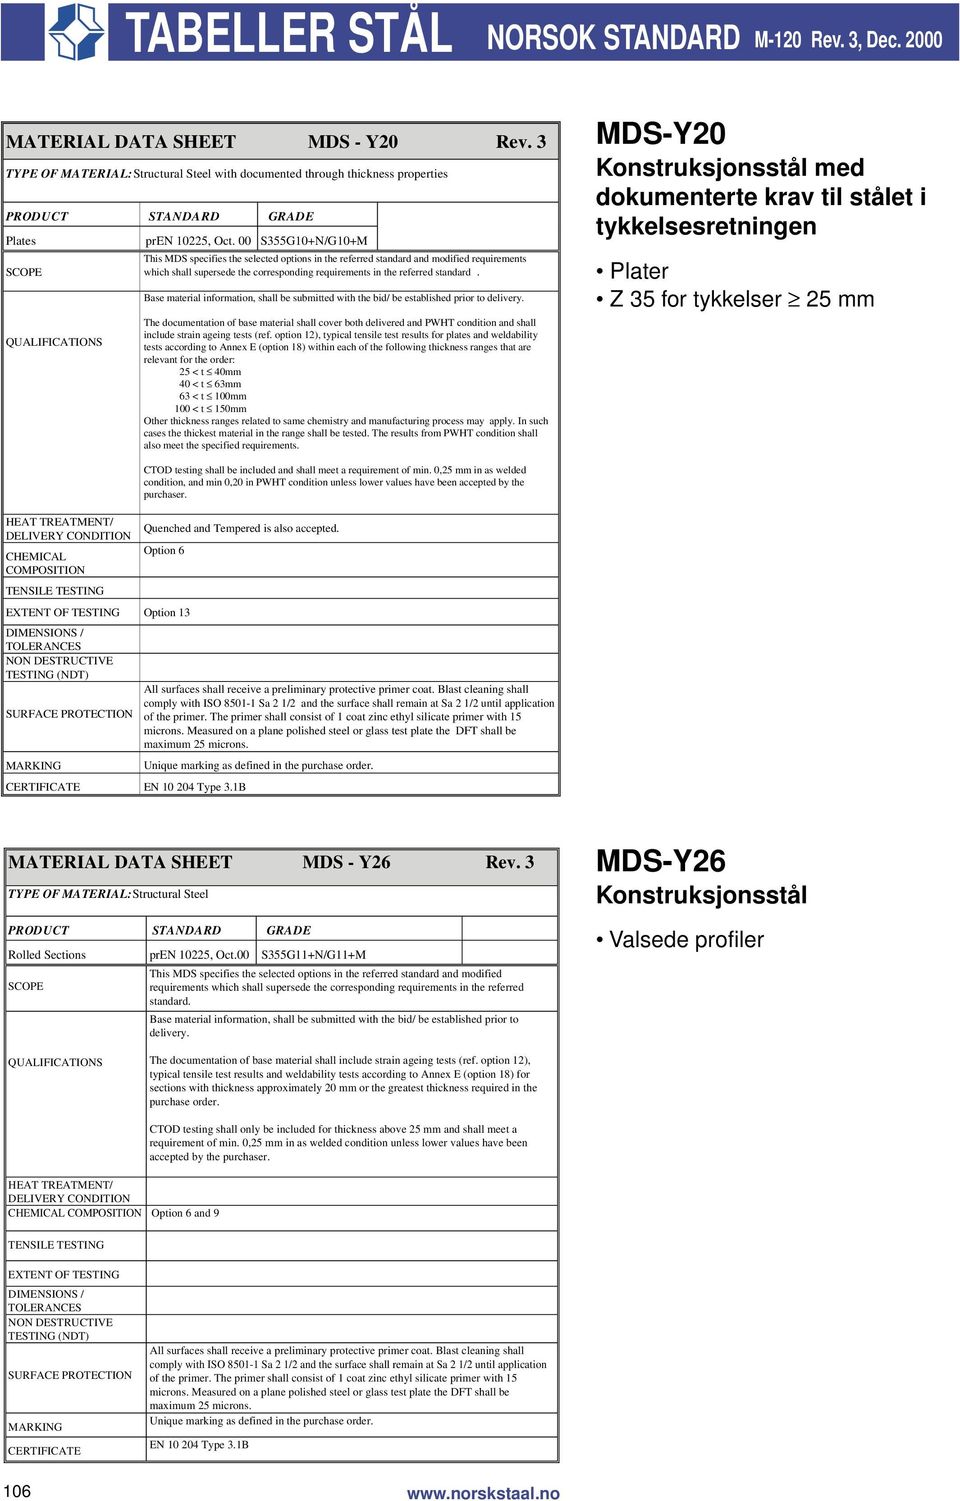 00 S355G10+N/G10+M This MDS specifies the selected options in the referred standard and modified requirements which shall supersede the corresponding requirements in the referred standard.